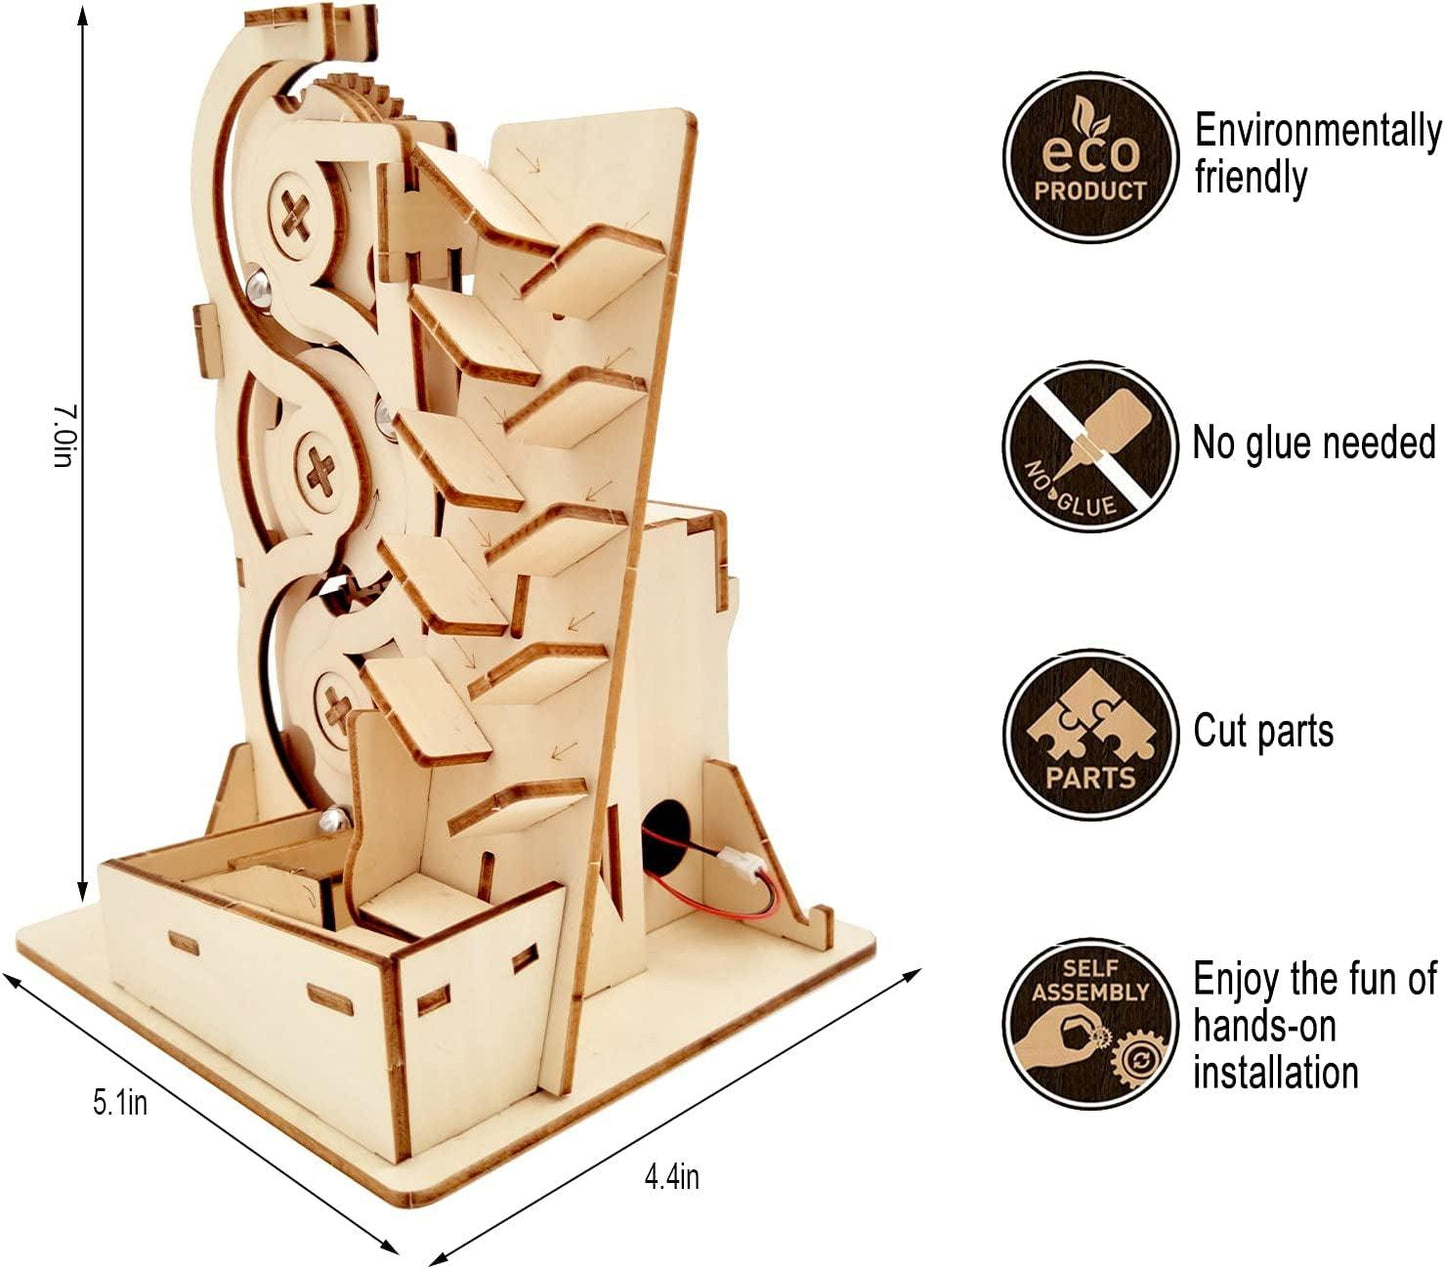 Solar 3D Wooden Puzzle Marble Run DIY Model Kit Craft Sets Educational Wood Mechanical Building Toys STEM Science Experiments - WoodArtSupply